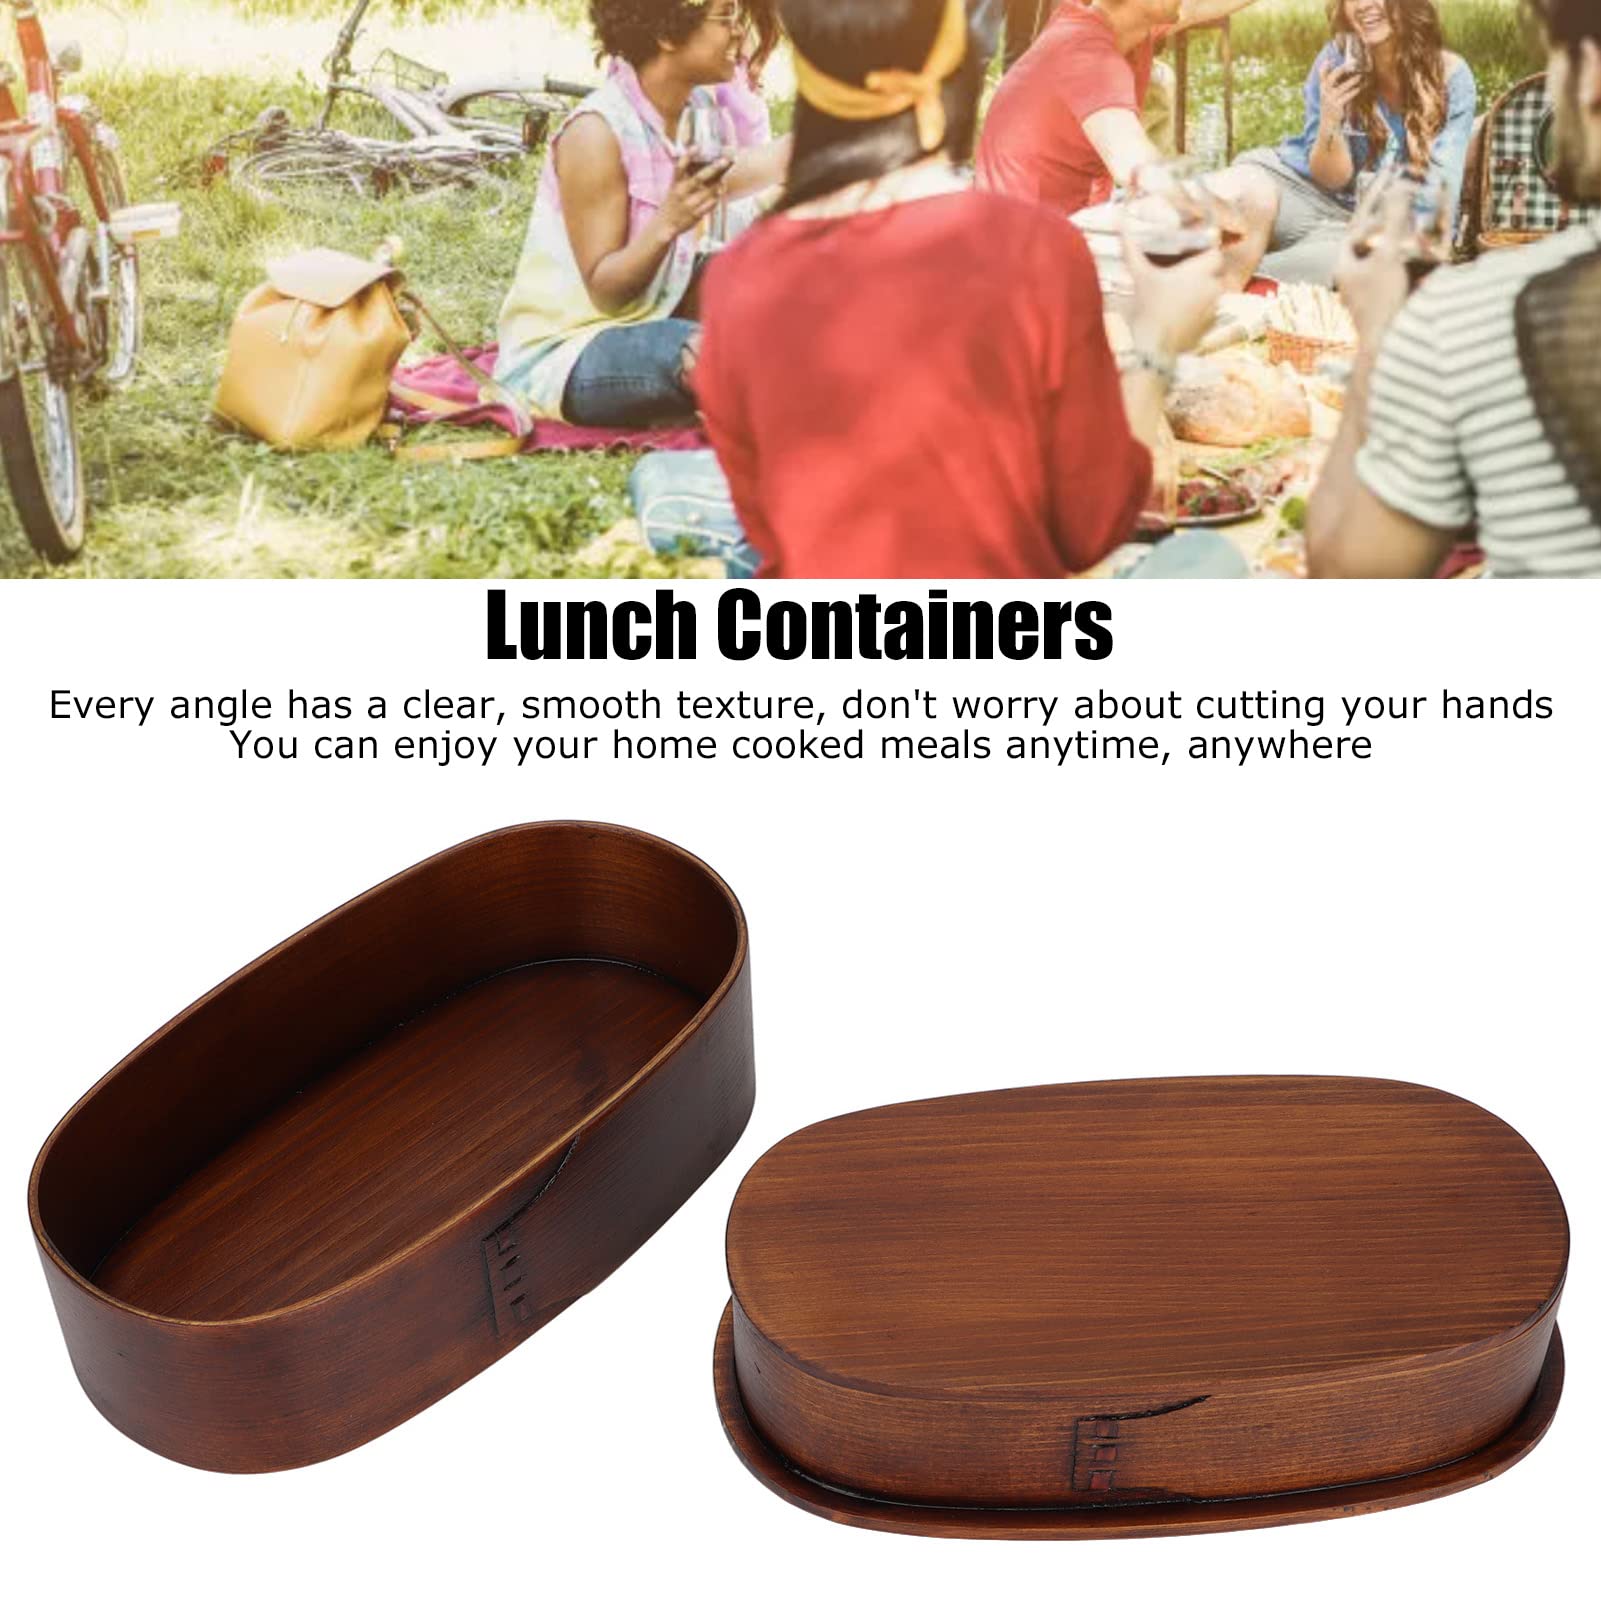 Yosoo 2 Layer Wooden Japanese Bento Box, Food Storage Containers, Easy to Carry, for Hiking, Climbing, Camping, Lake Fishing, Construction Sites, Picnics